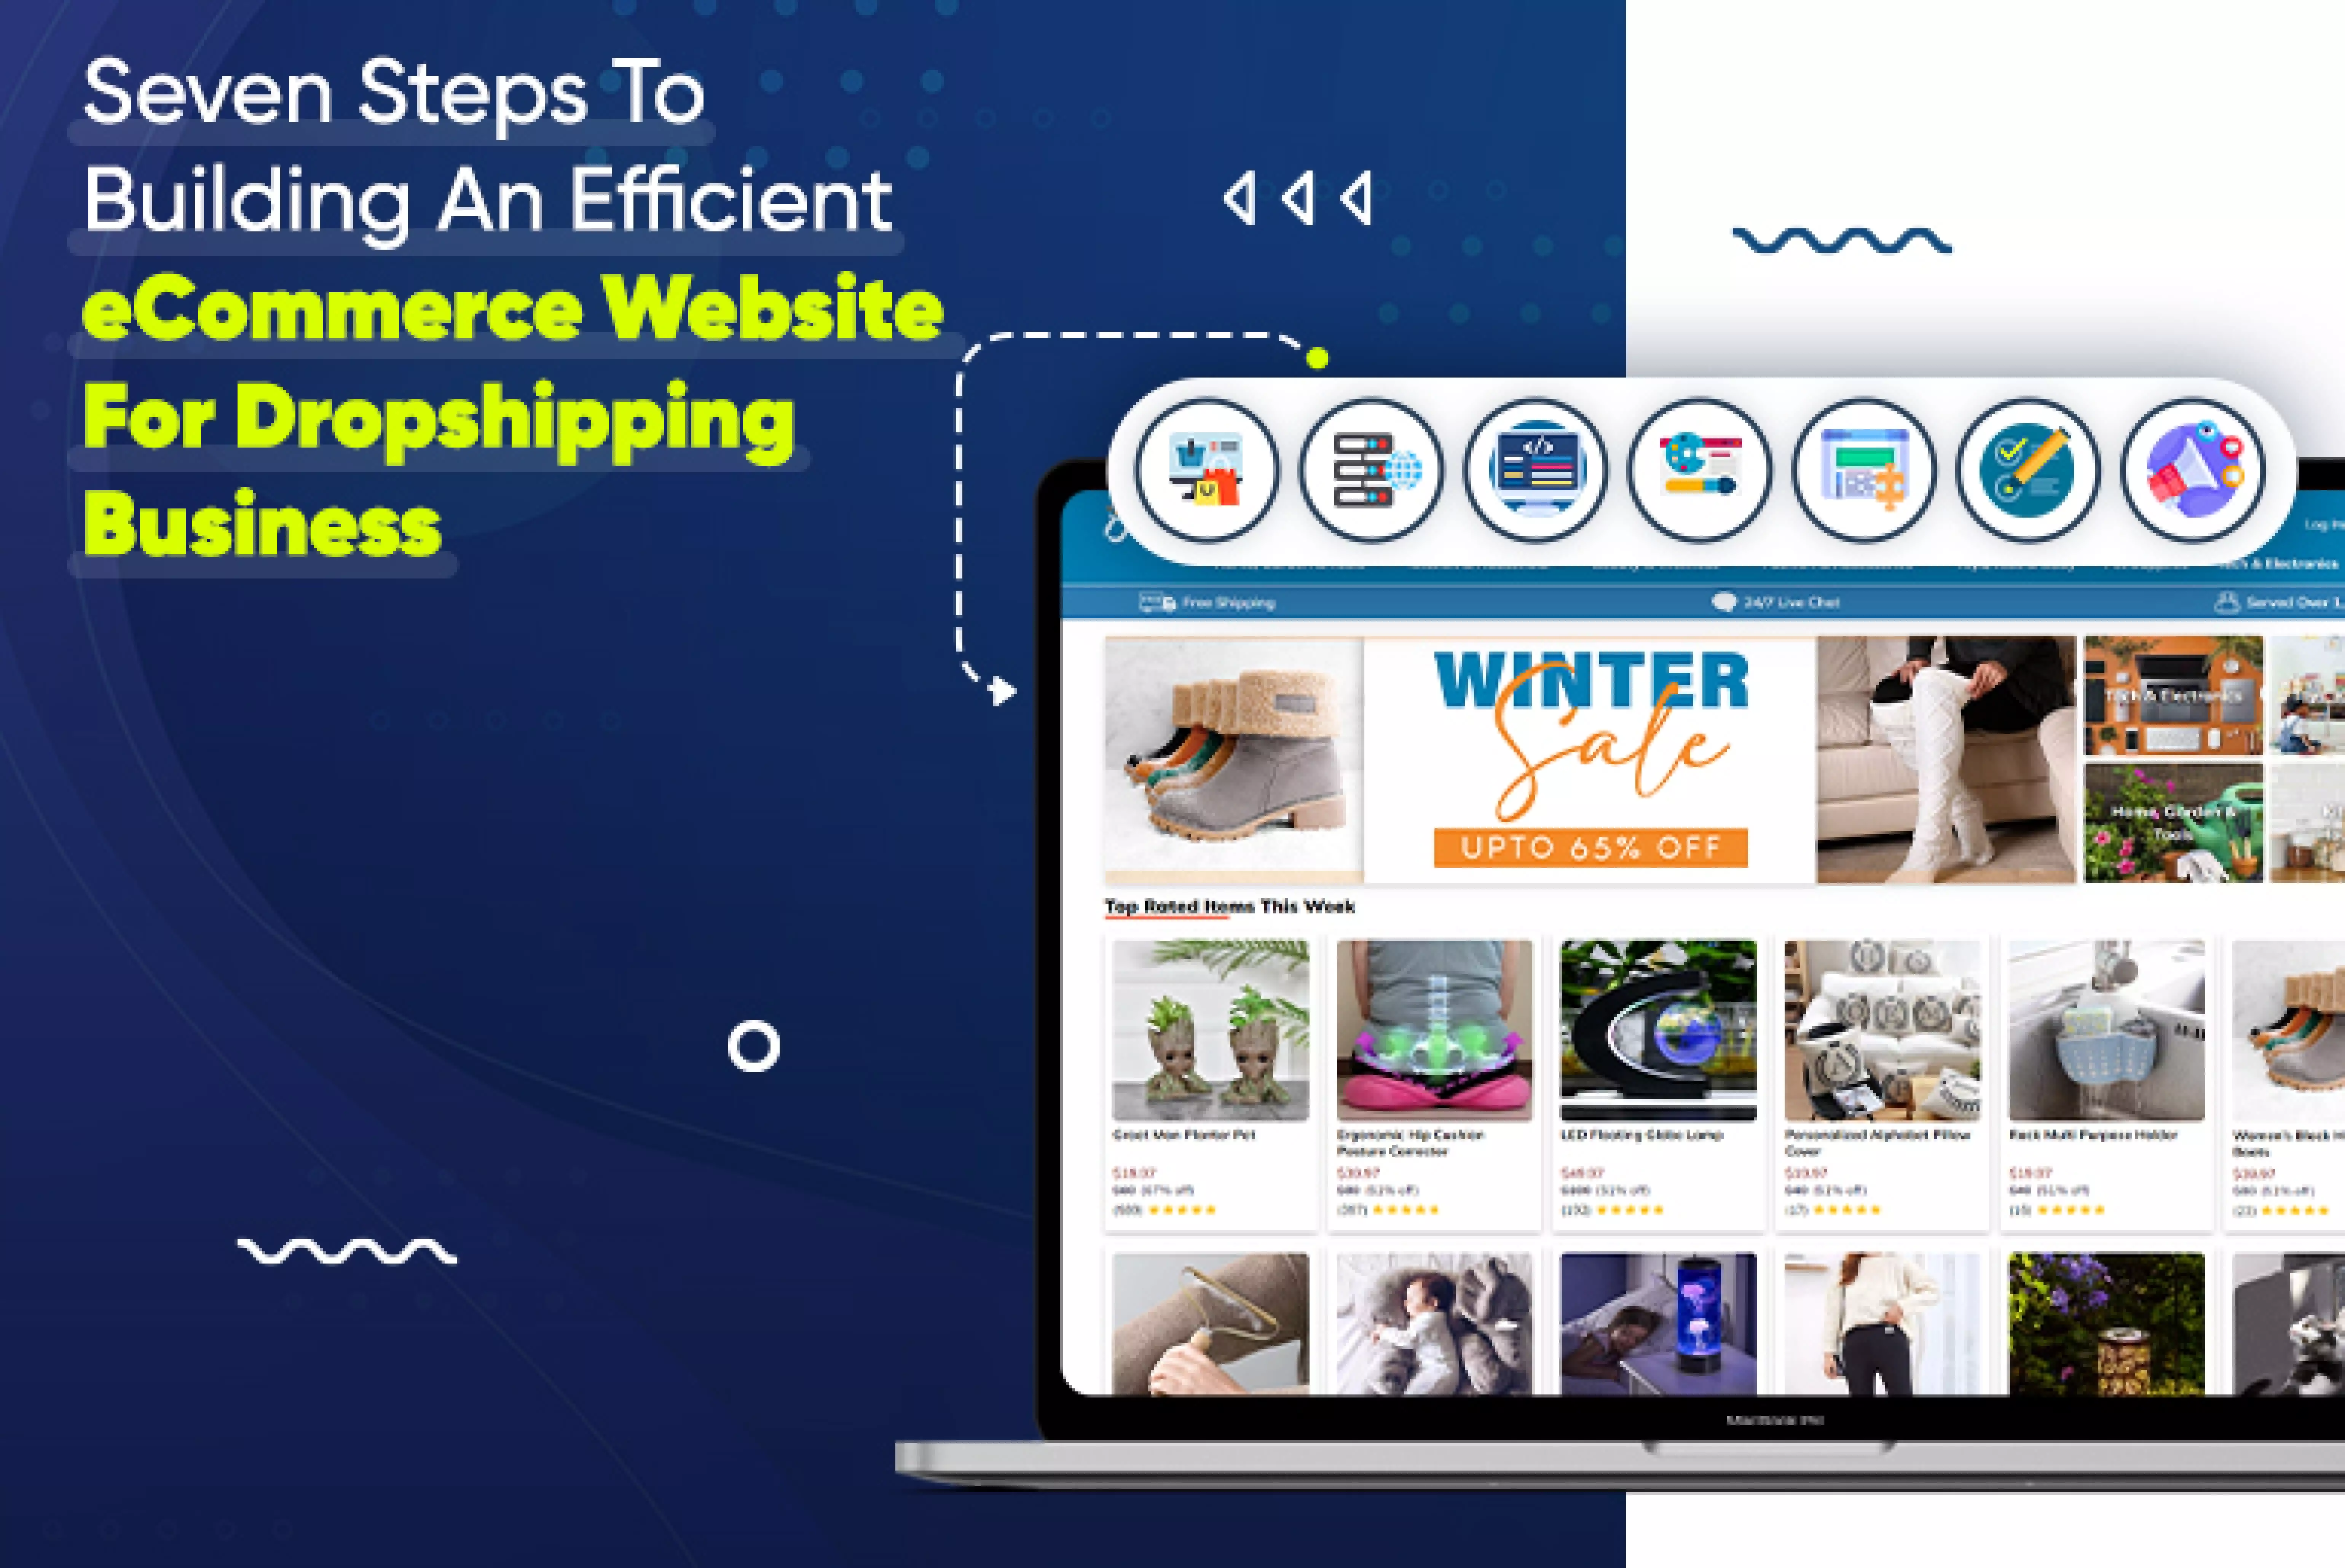 Seven steps to building an efficient e-commerce website for dropshipping business _Thum